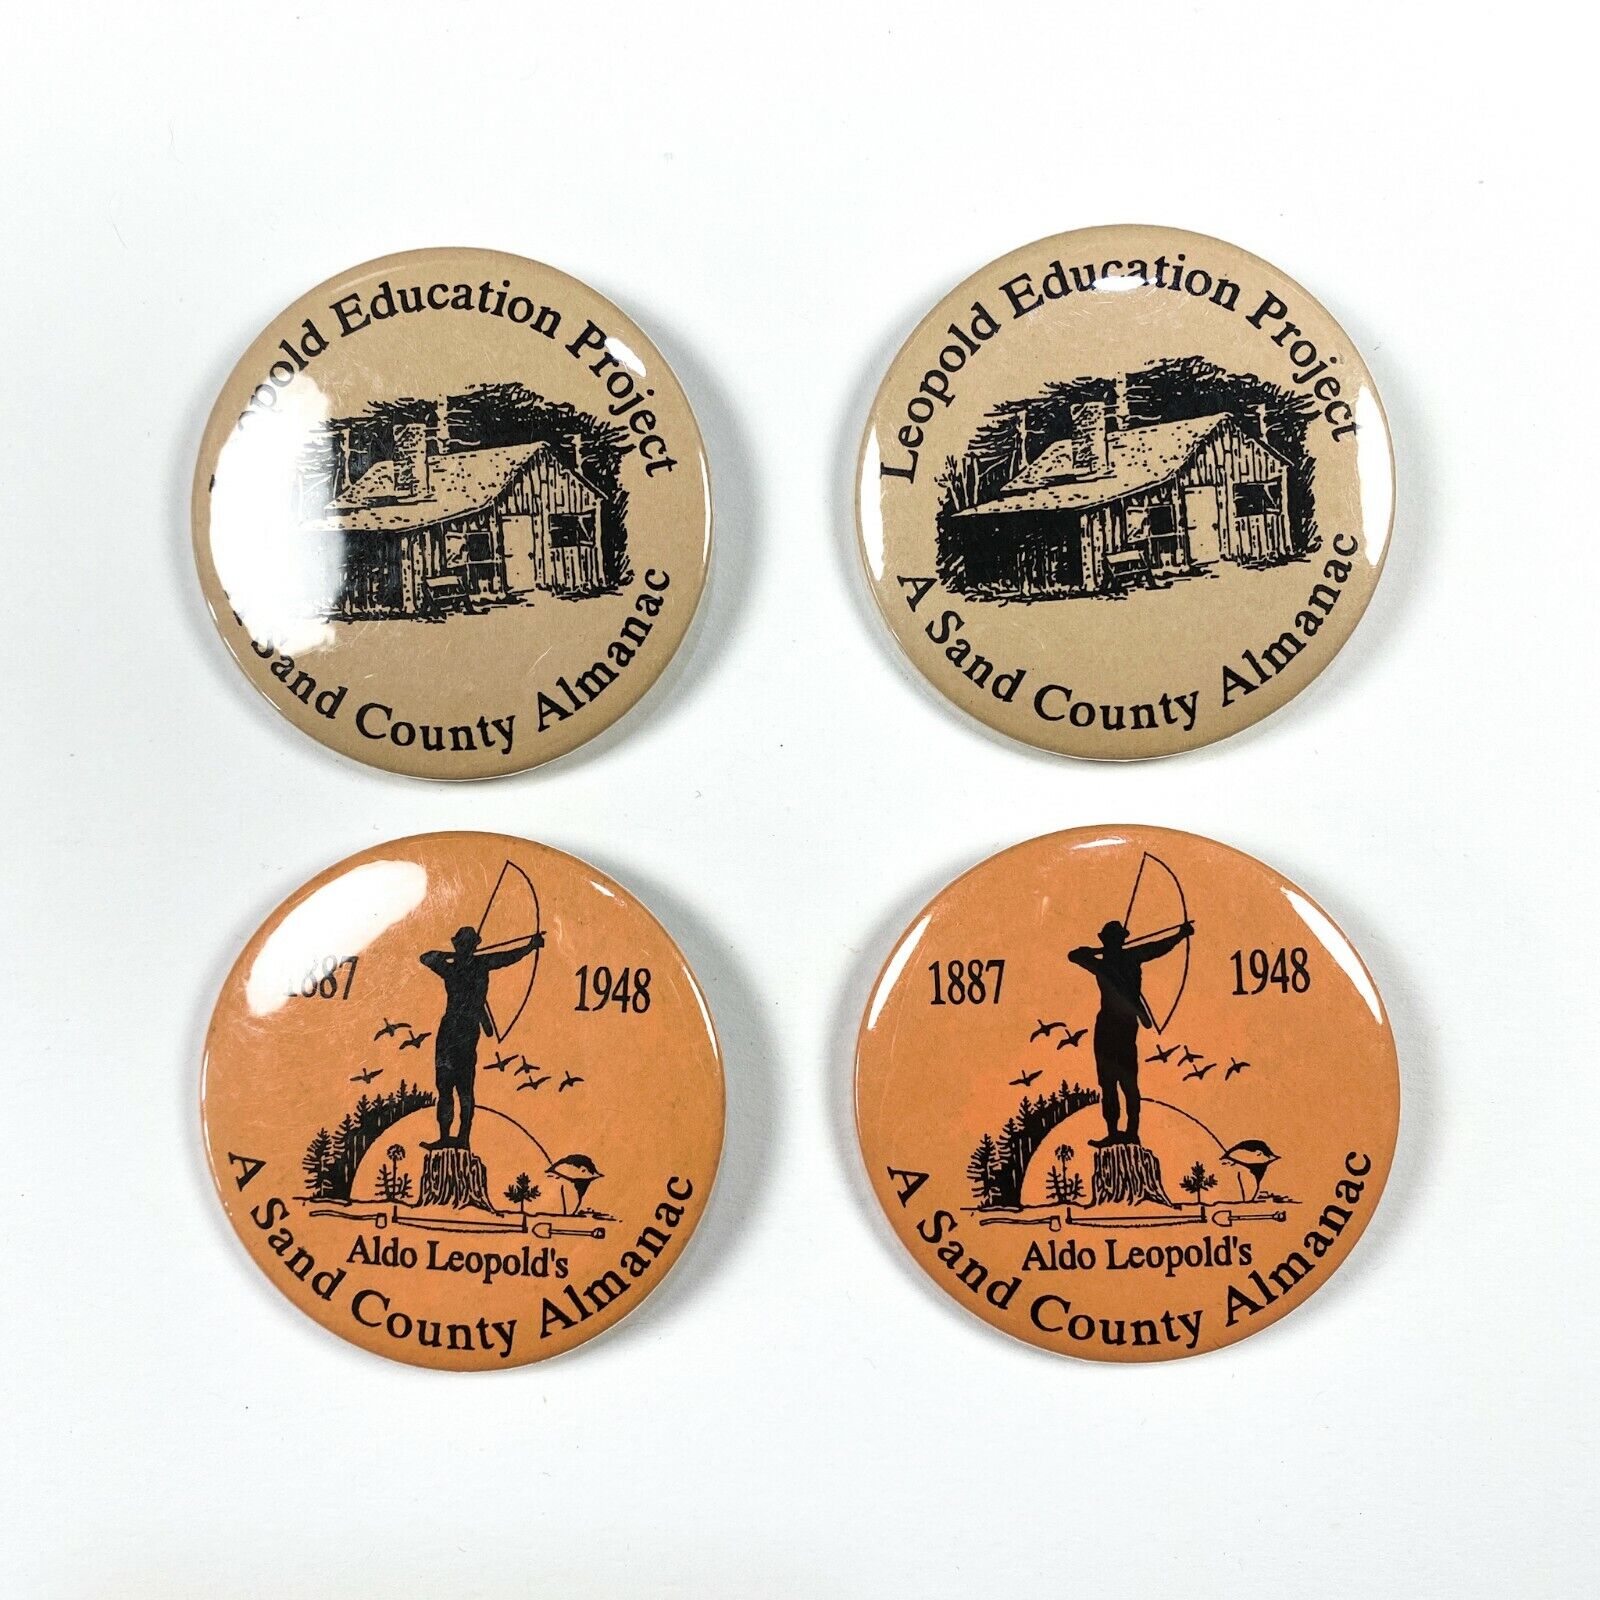 Lot of 4 Aldo Leopold Education Project Sand County Almanac Pin Buttons